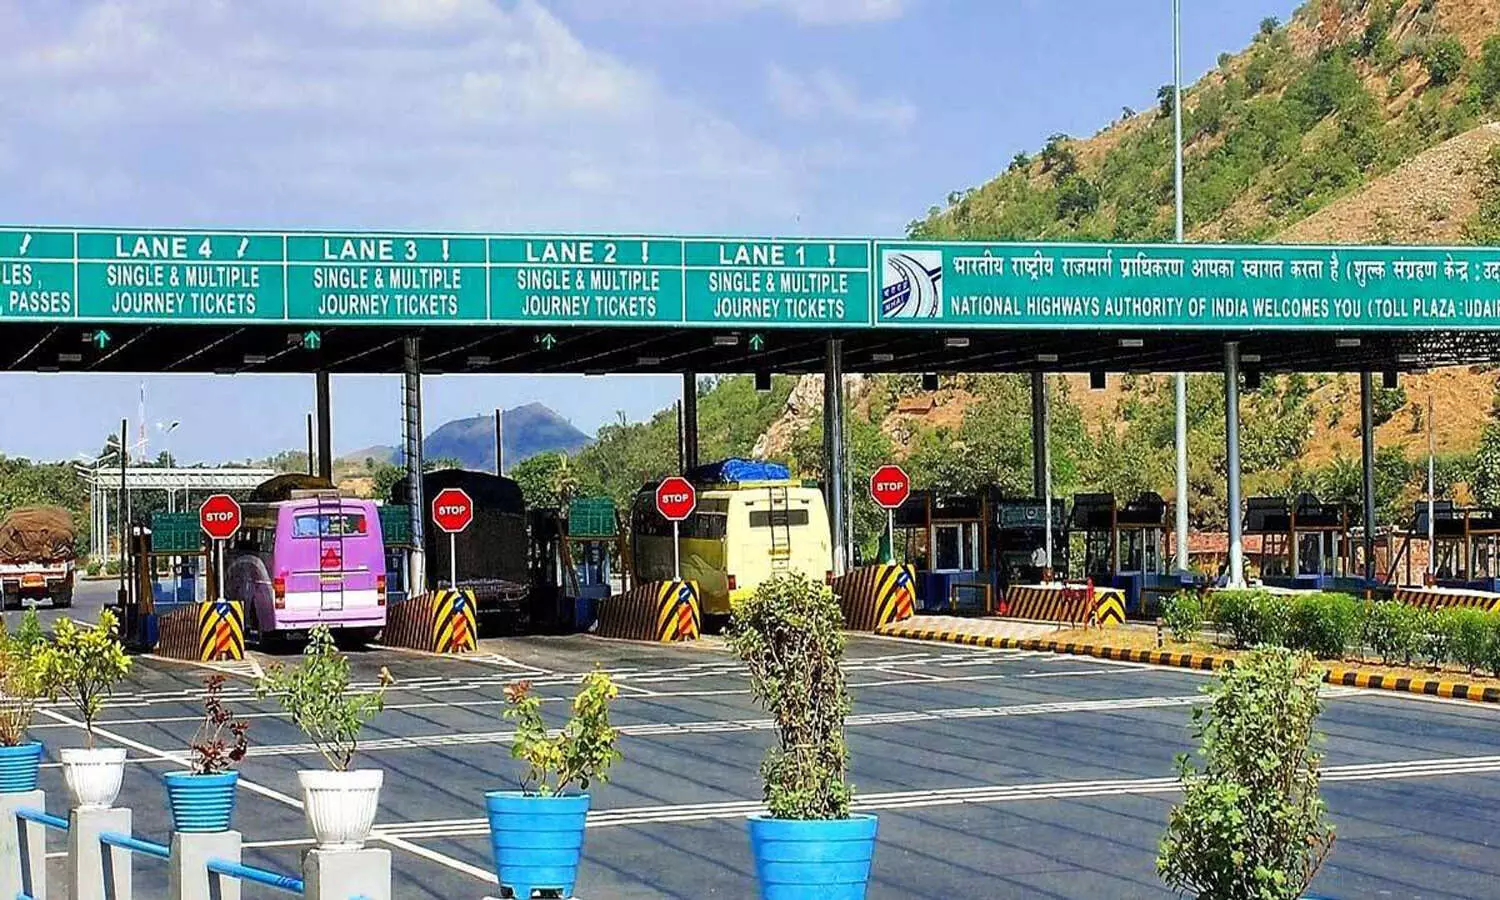 New toll plaza rules: No toll tax to be paid if wait time exceeds 10 seconds